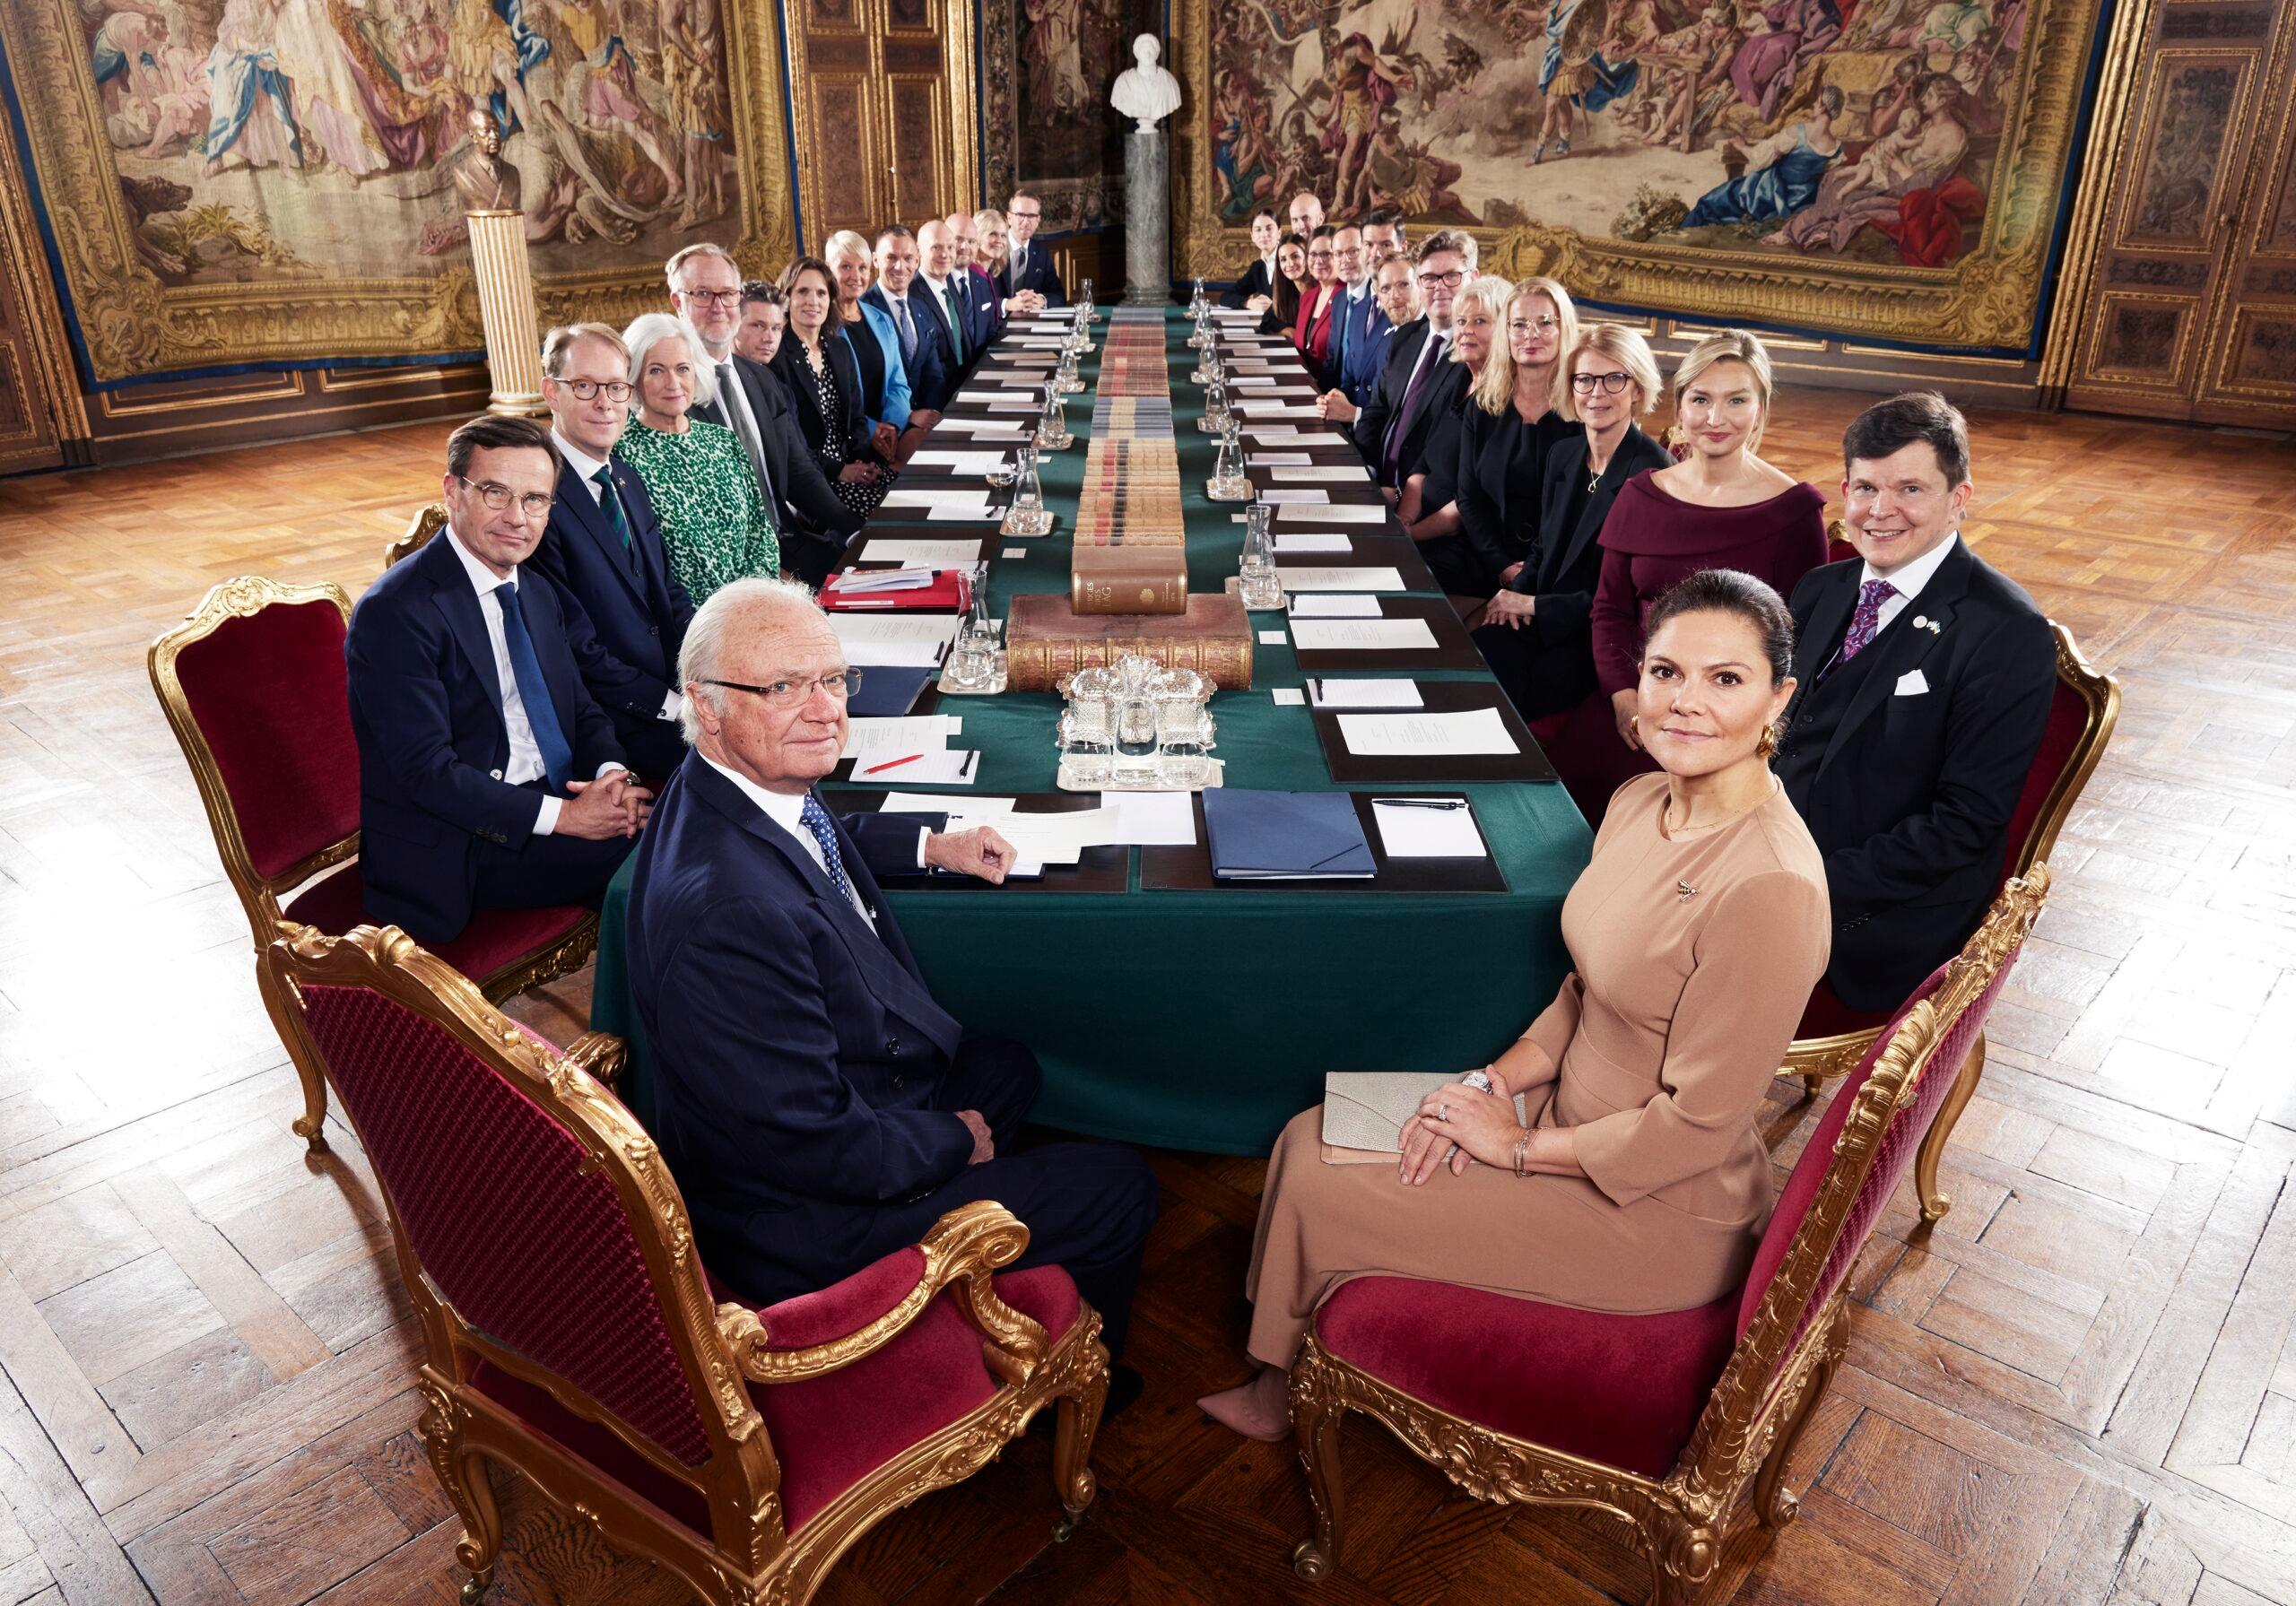 King Carl XVI Gustaf and Crown Princess Victoria seated at a long table with the new Swedish government.  